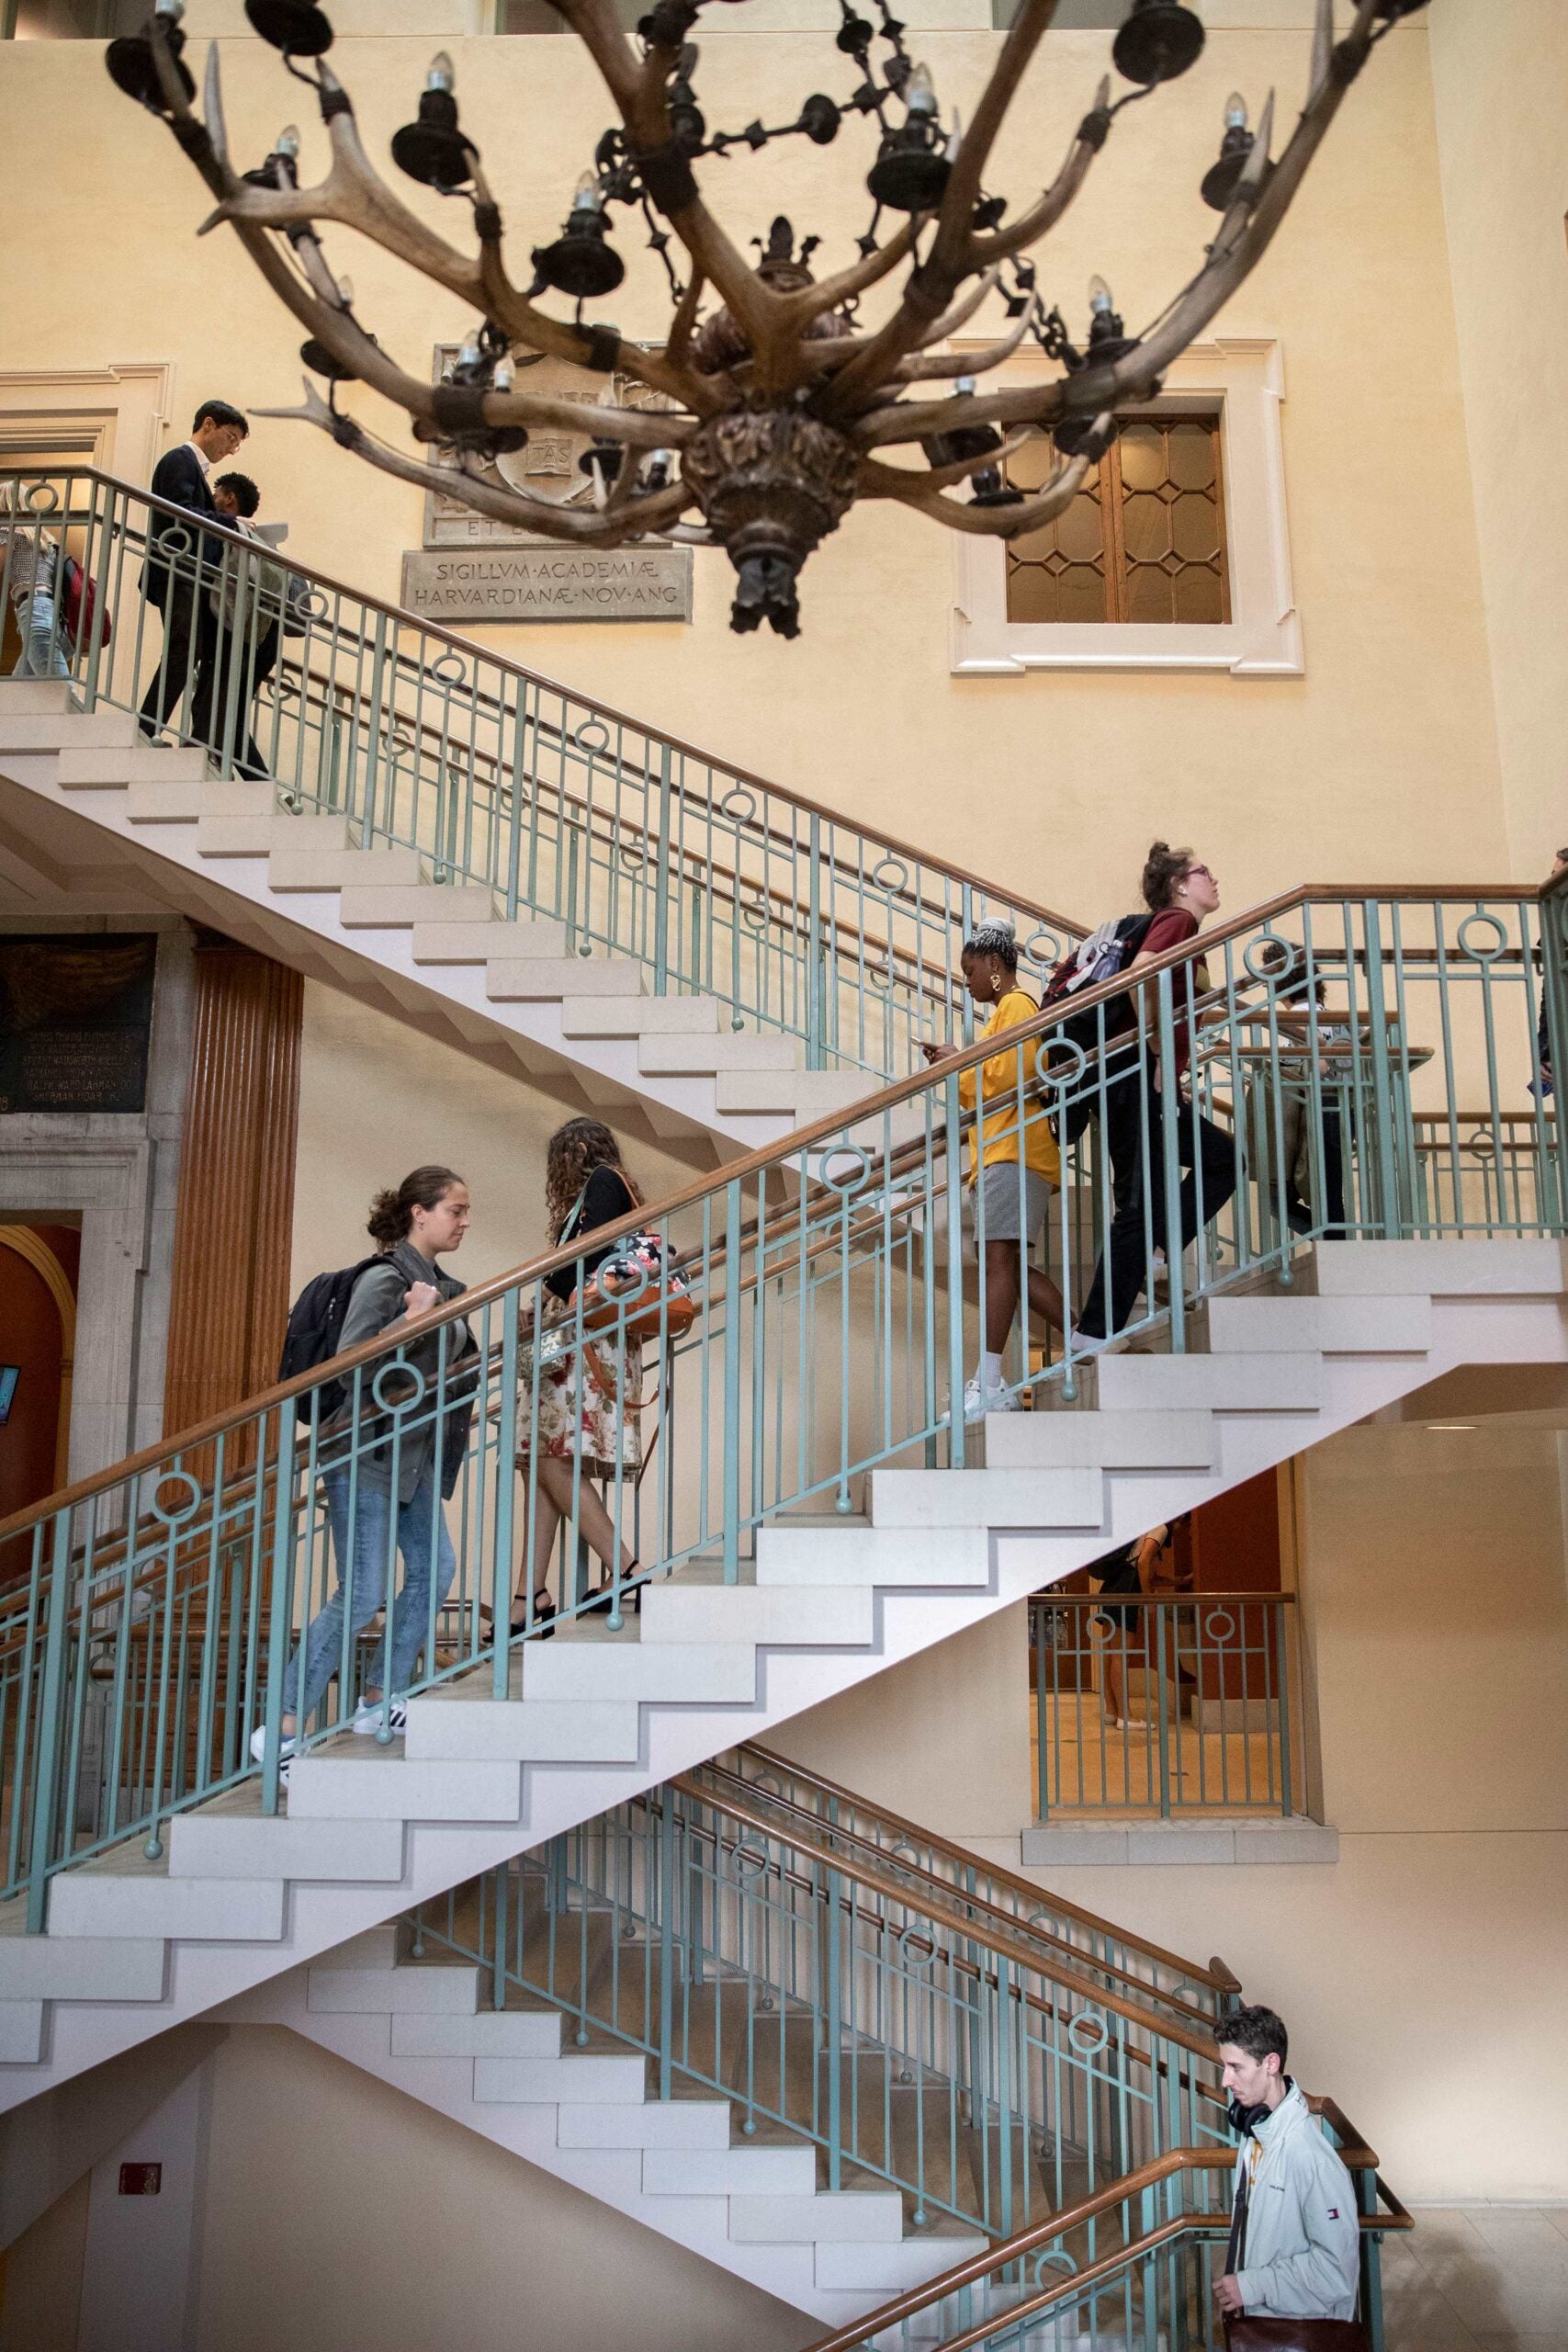 Students walking up and down a three level staircase under a decorative chandelier.